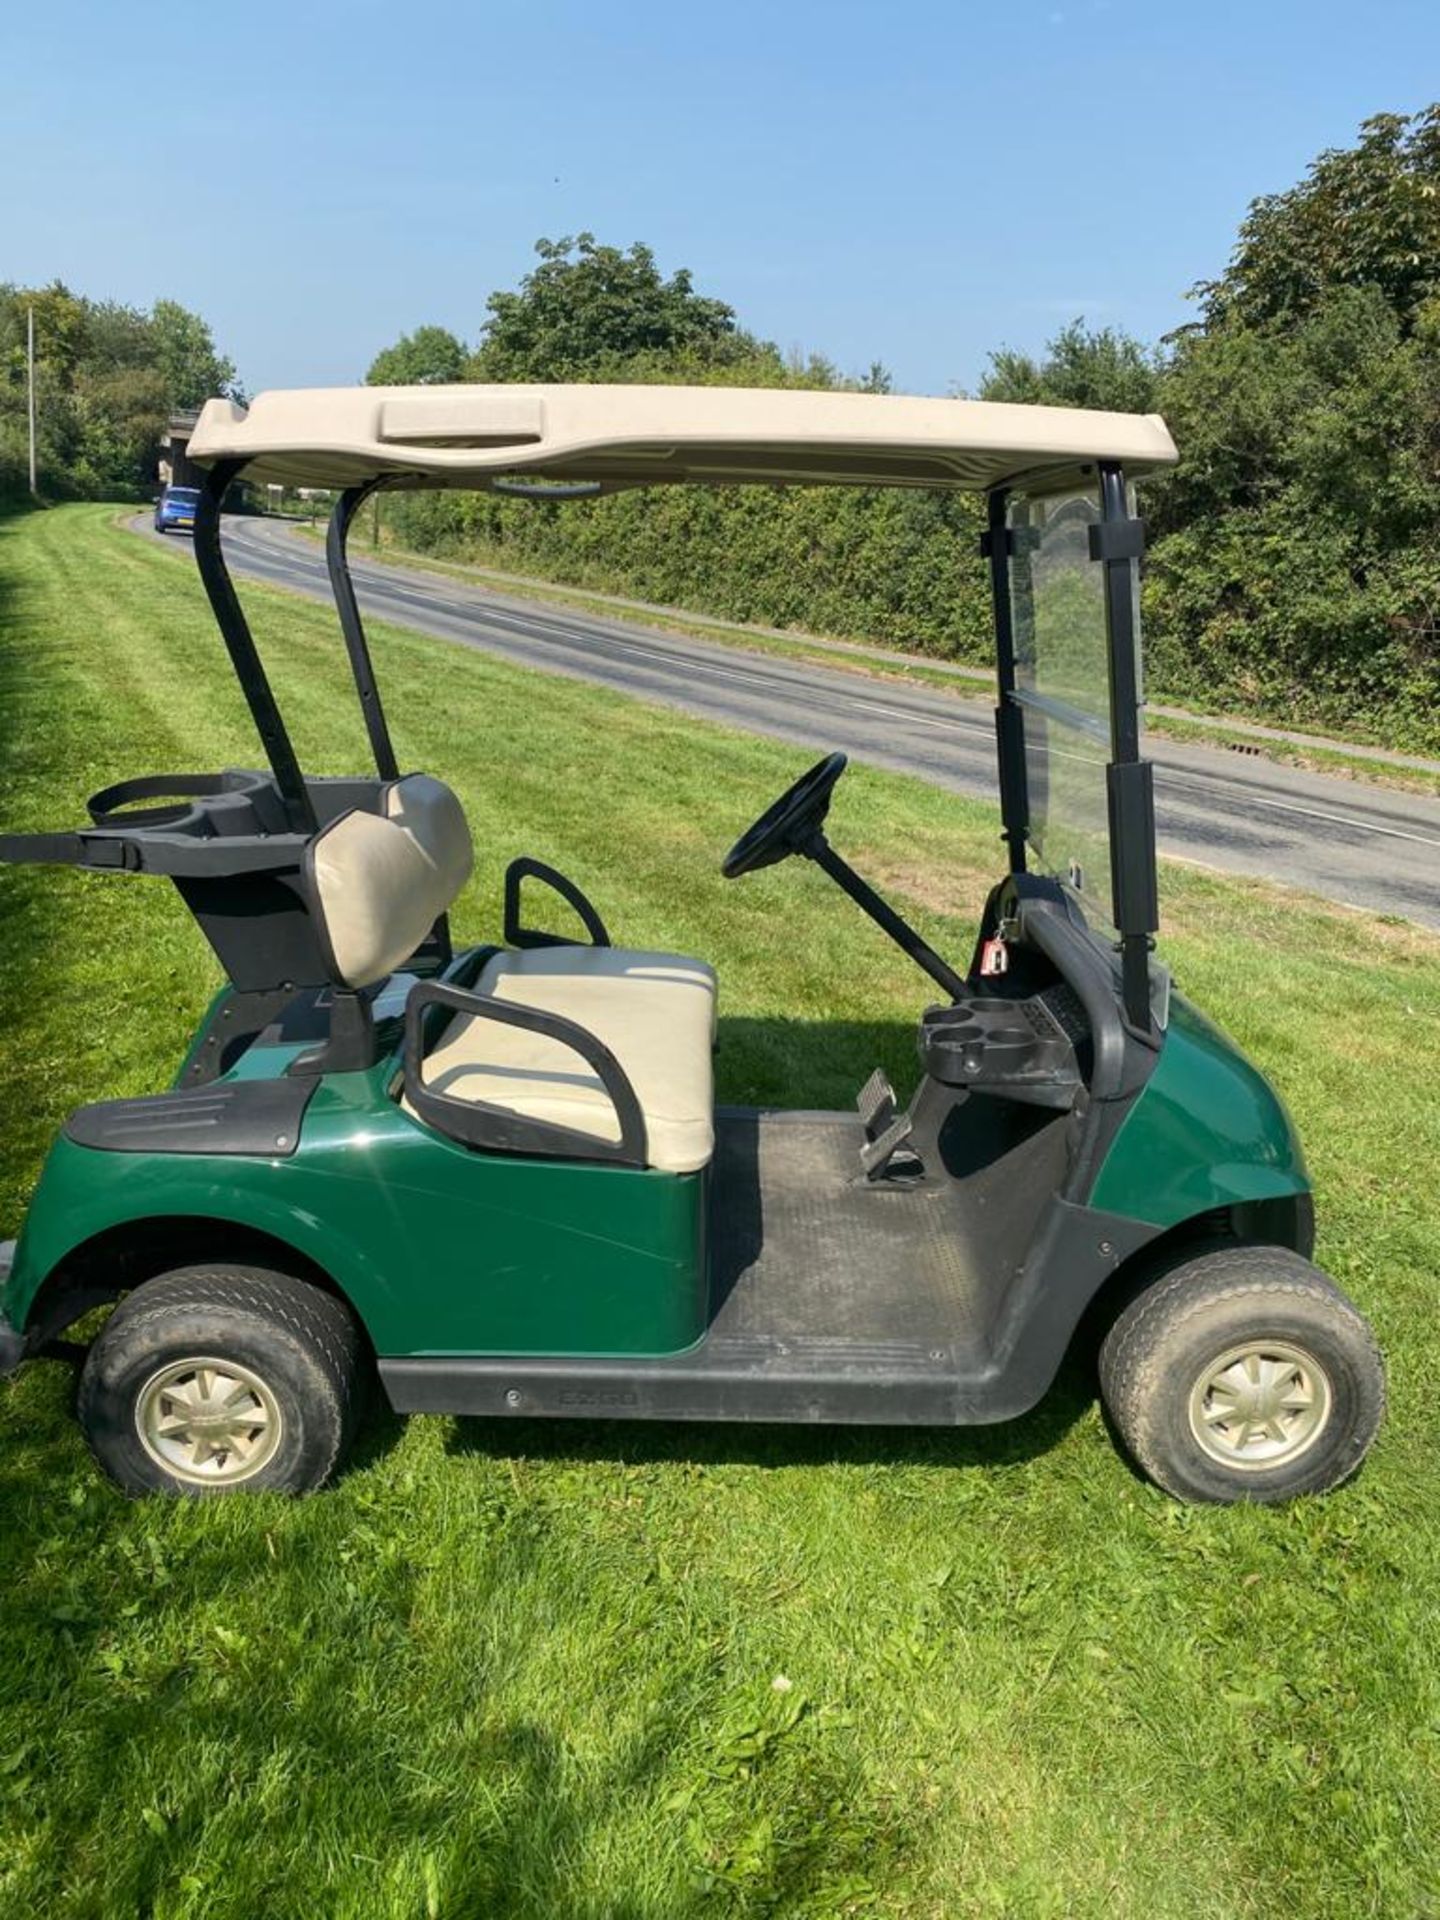 EZGO ELECTRIC GOLF BUGGY, FULL SUN CANOPY, YEAR 03/17, IN LOVELY CONDITION *PLUS VAT* - Image 3 of 5